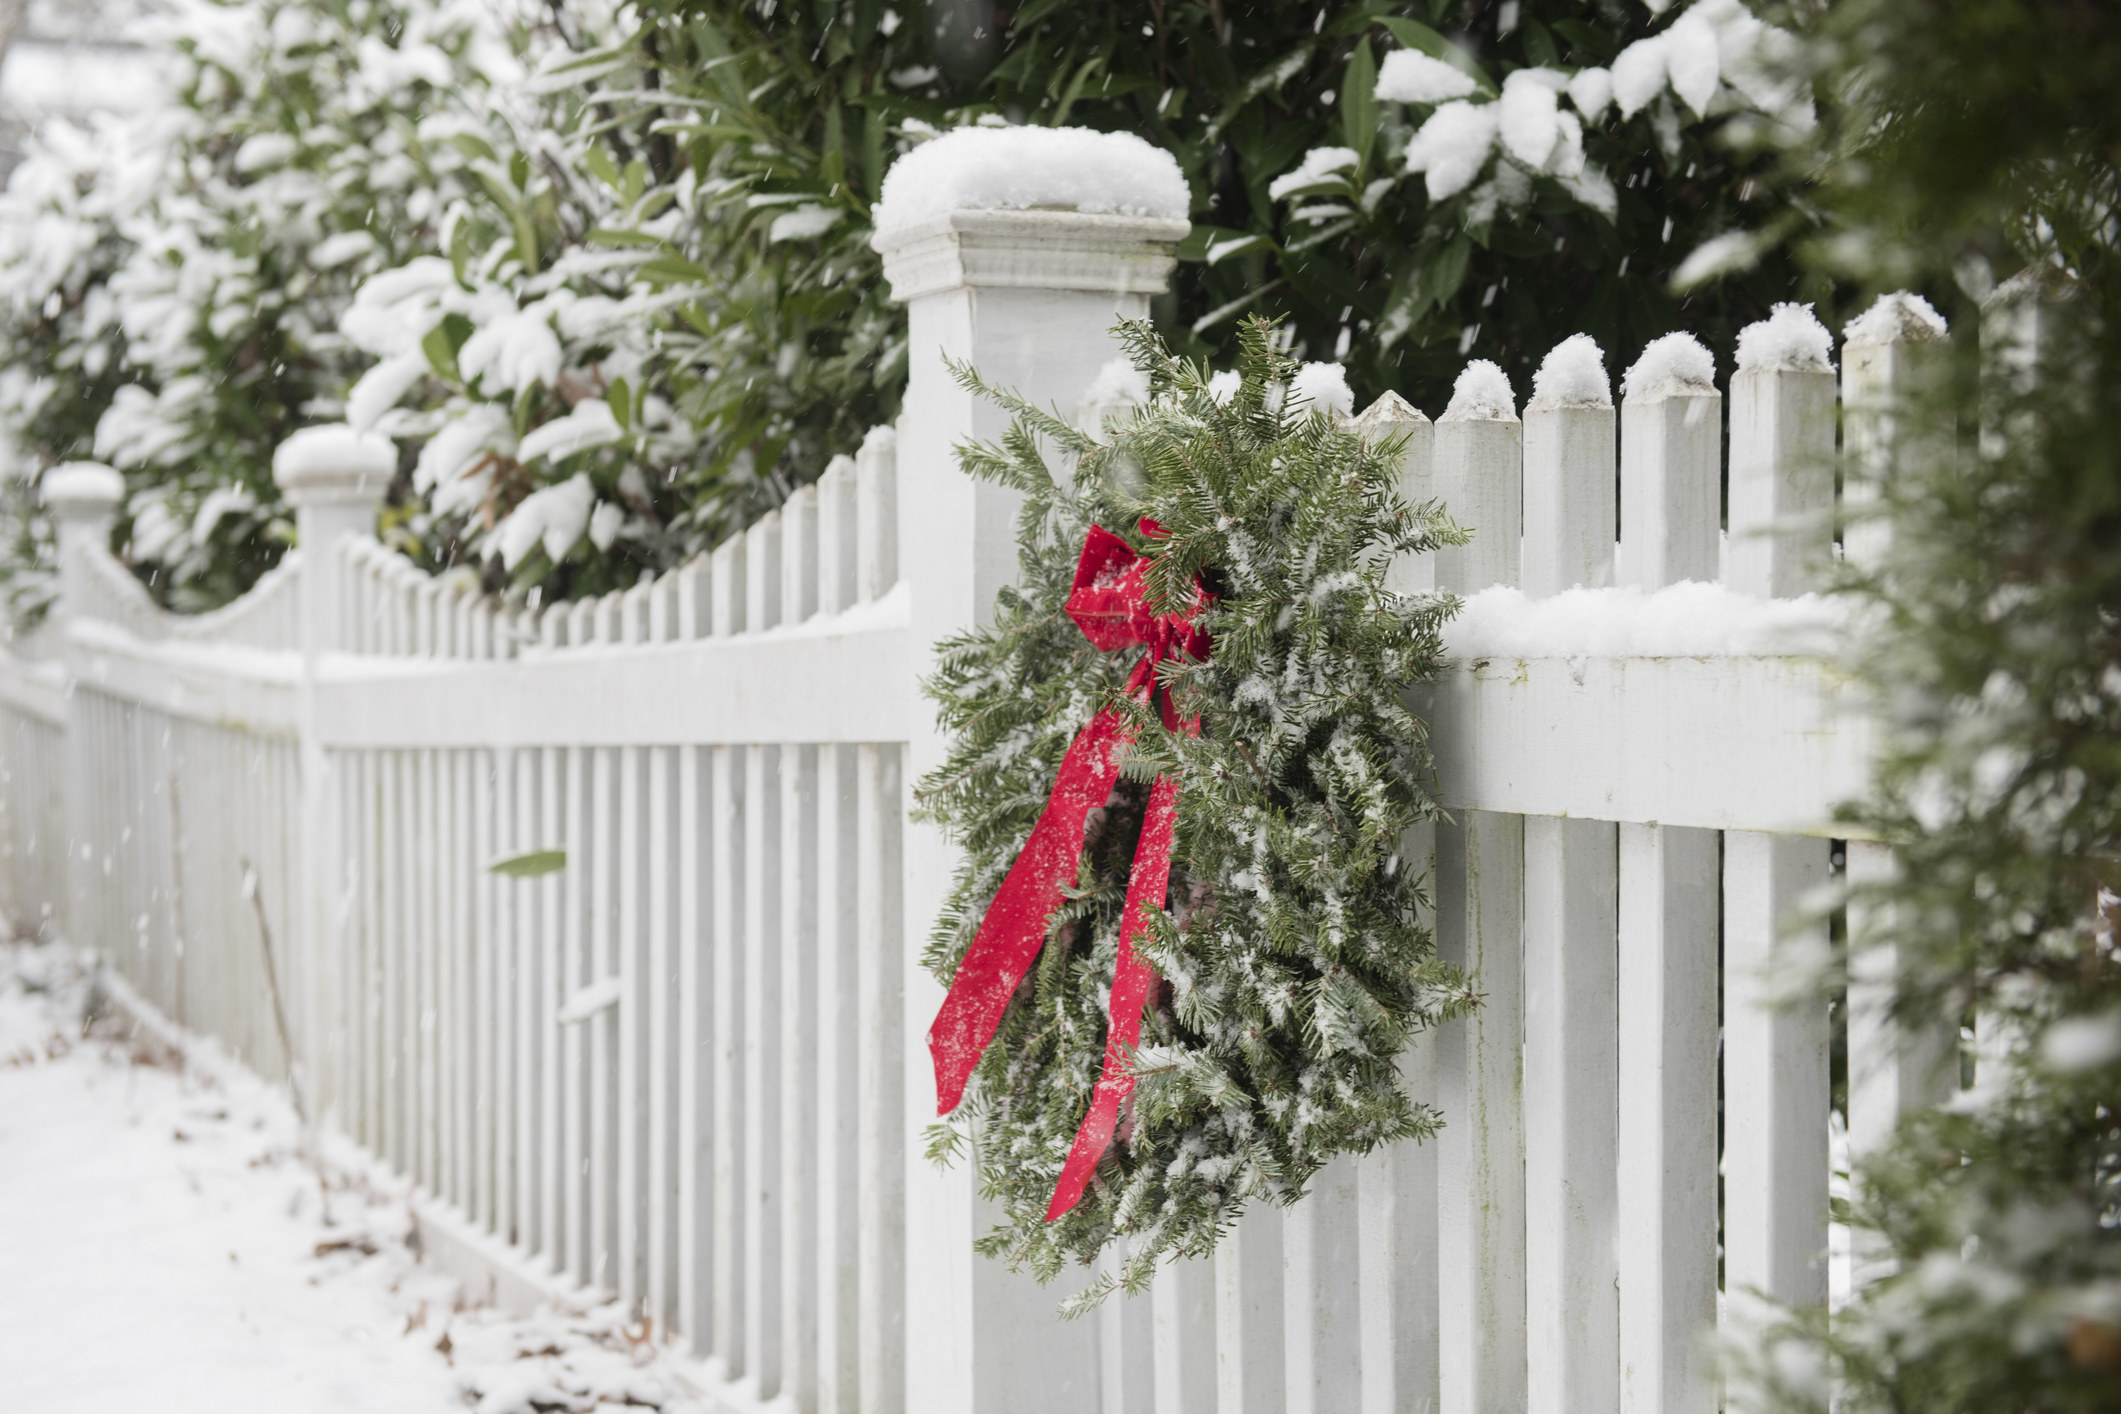 Christmas wreath hanging on white fence covered in snow.